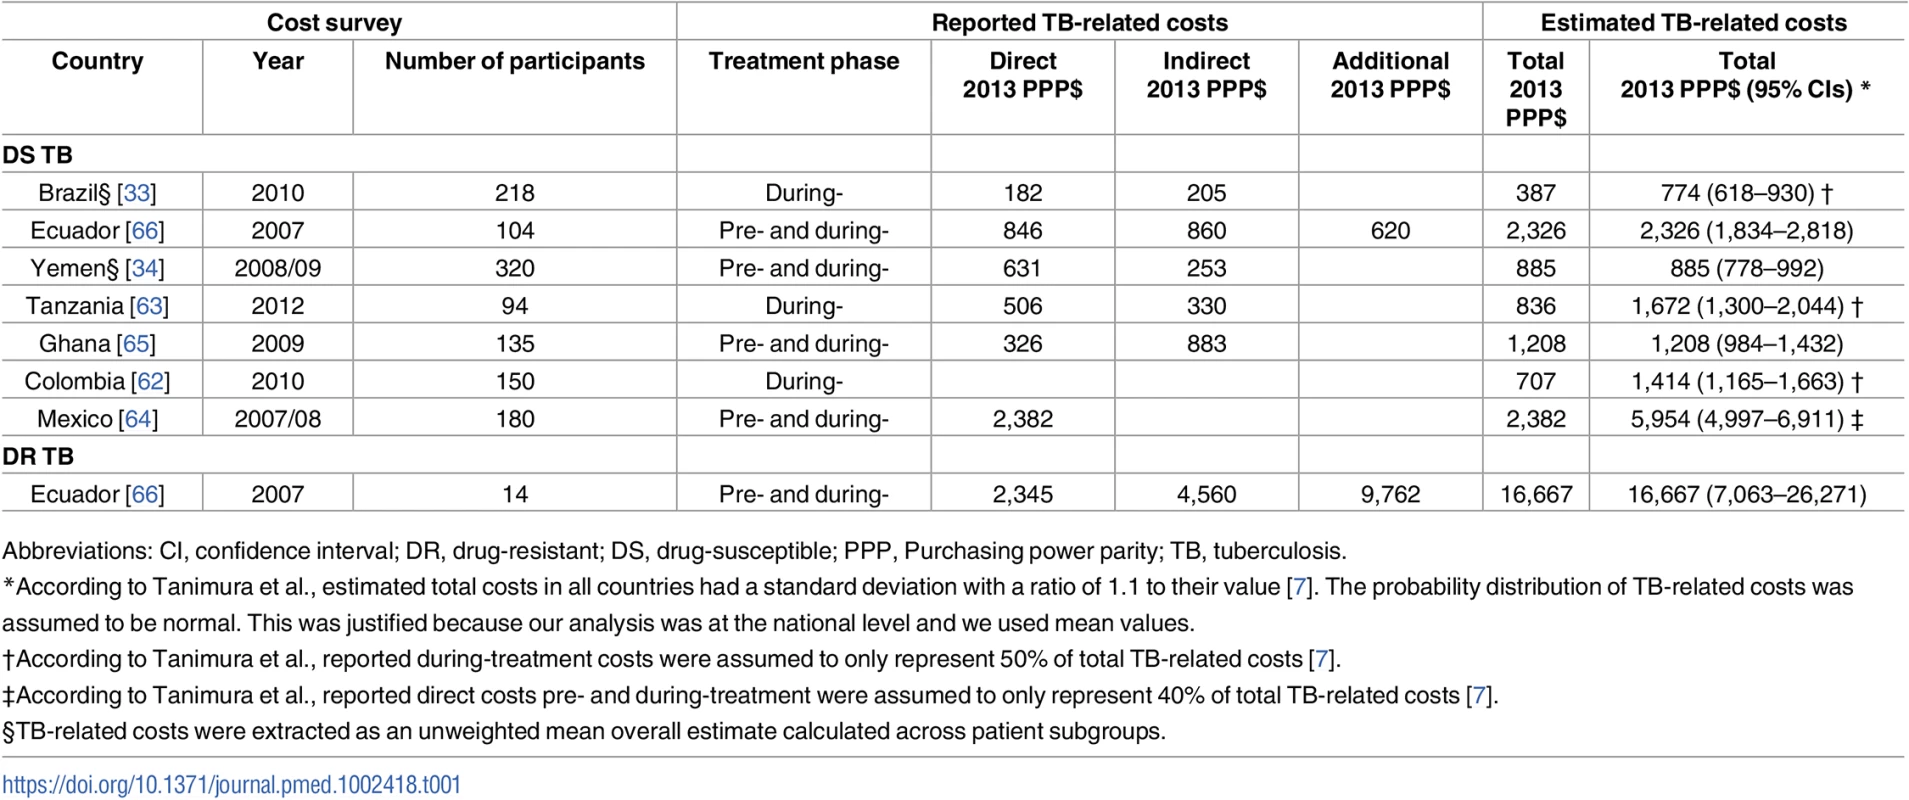 Summary of TB-related cost surveys included in the study.